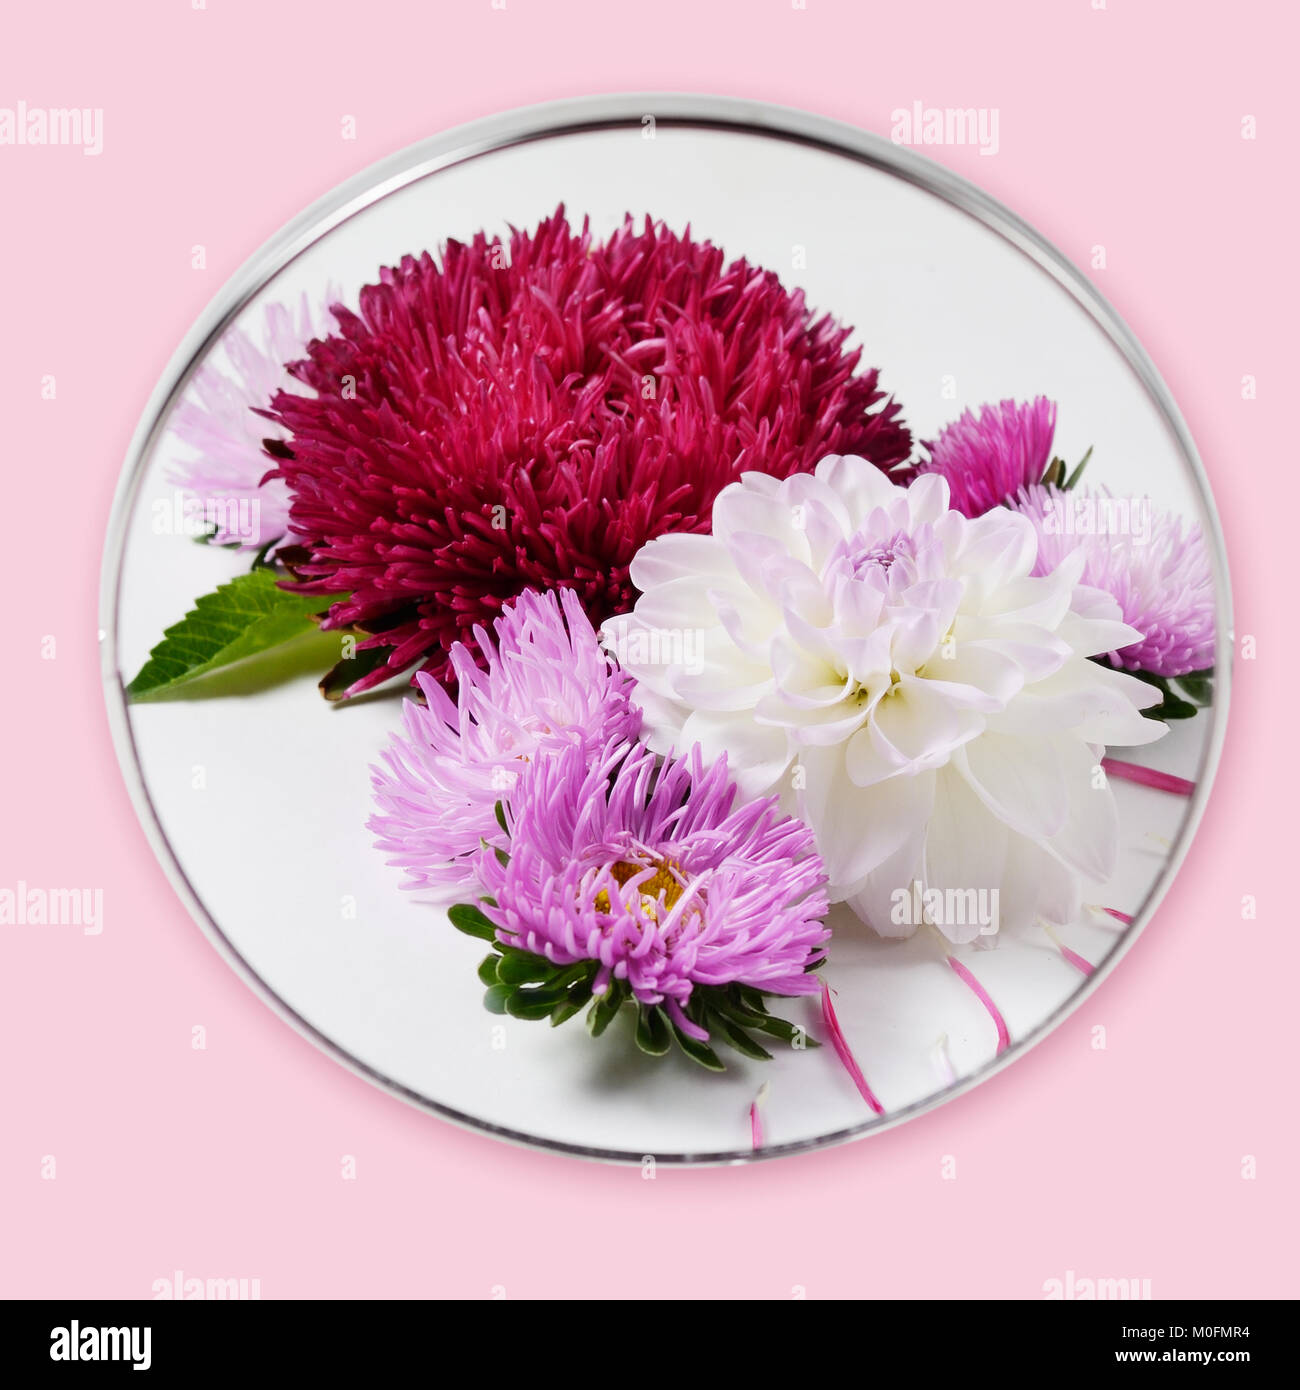 Creative autumn flowers background. Dahlias and chrysanthemums reflected in a round mirror. Stock Photo